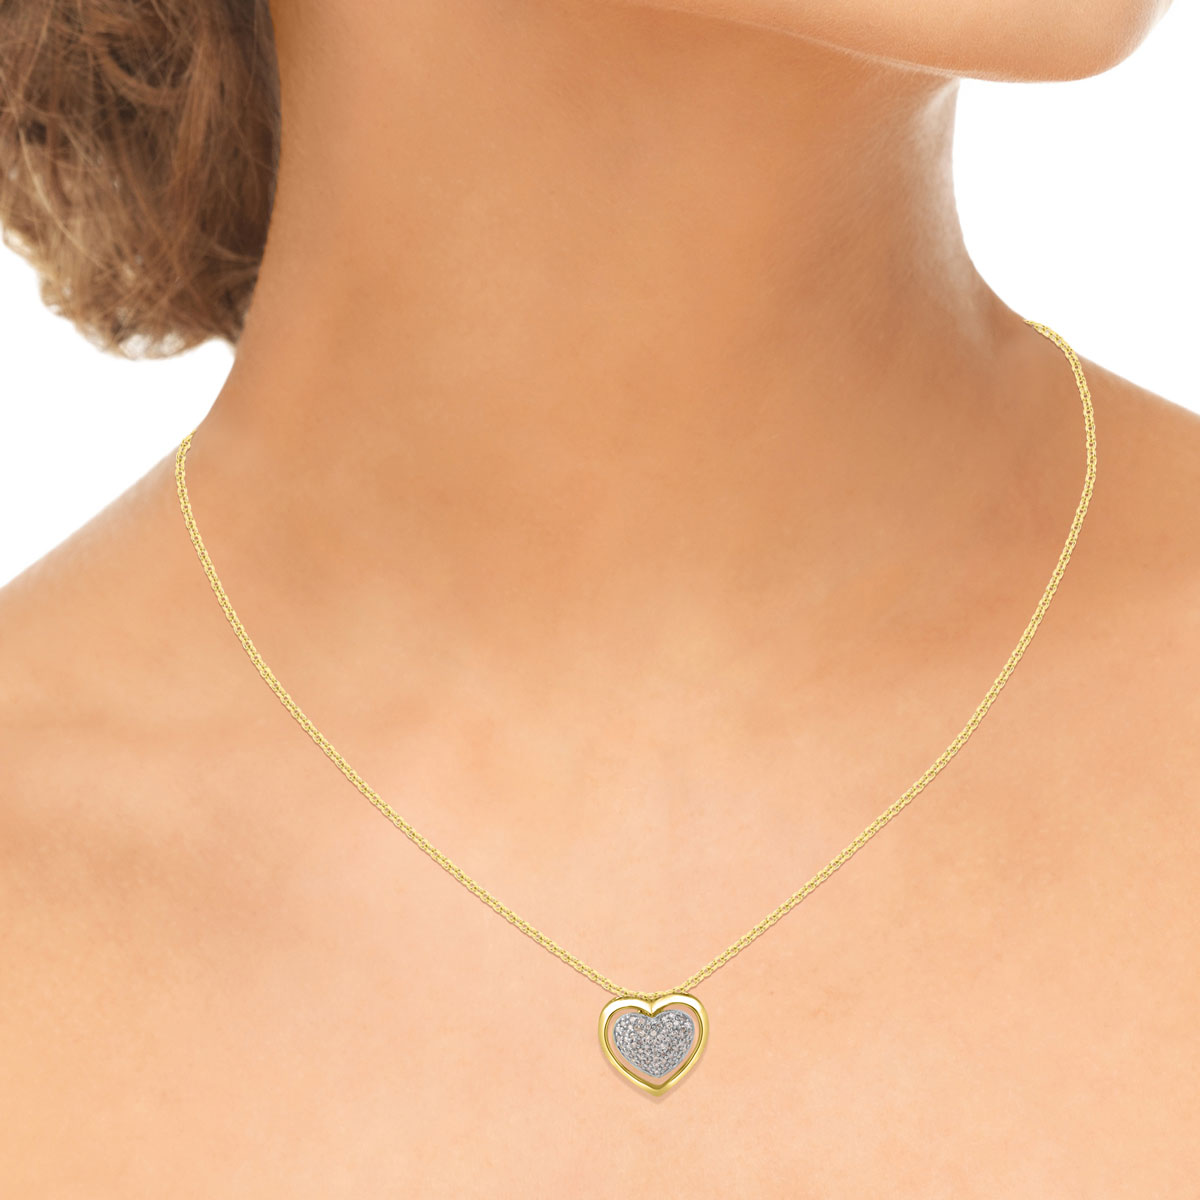 Pave Set Heart Pendant Necklace in 925 Sterling Silver